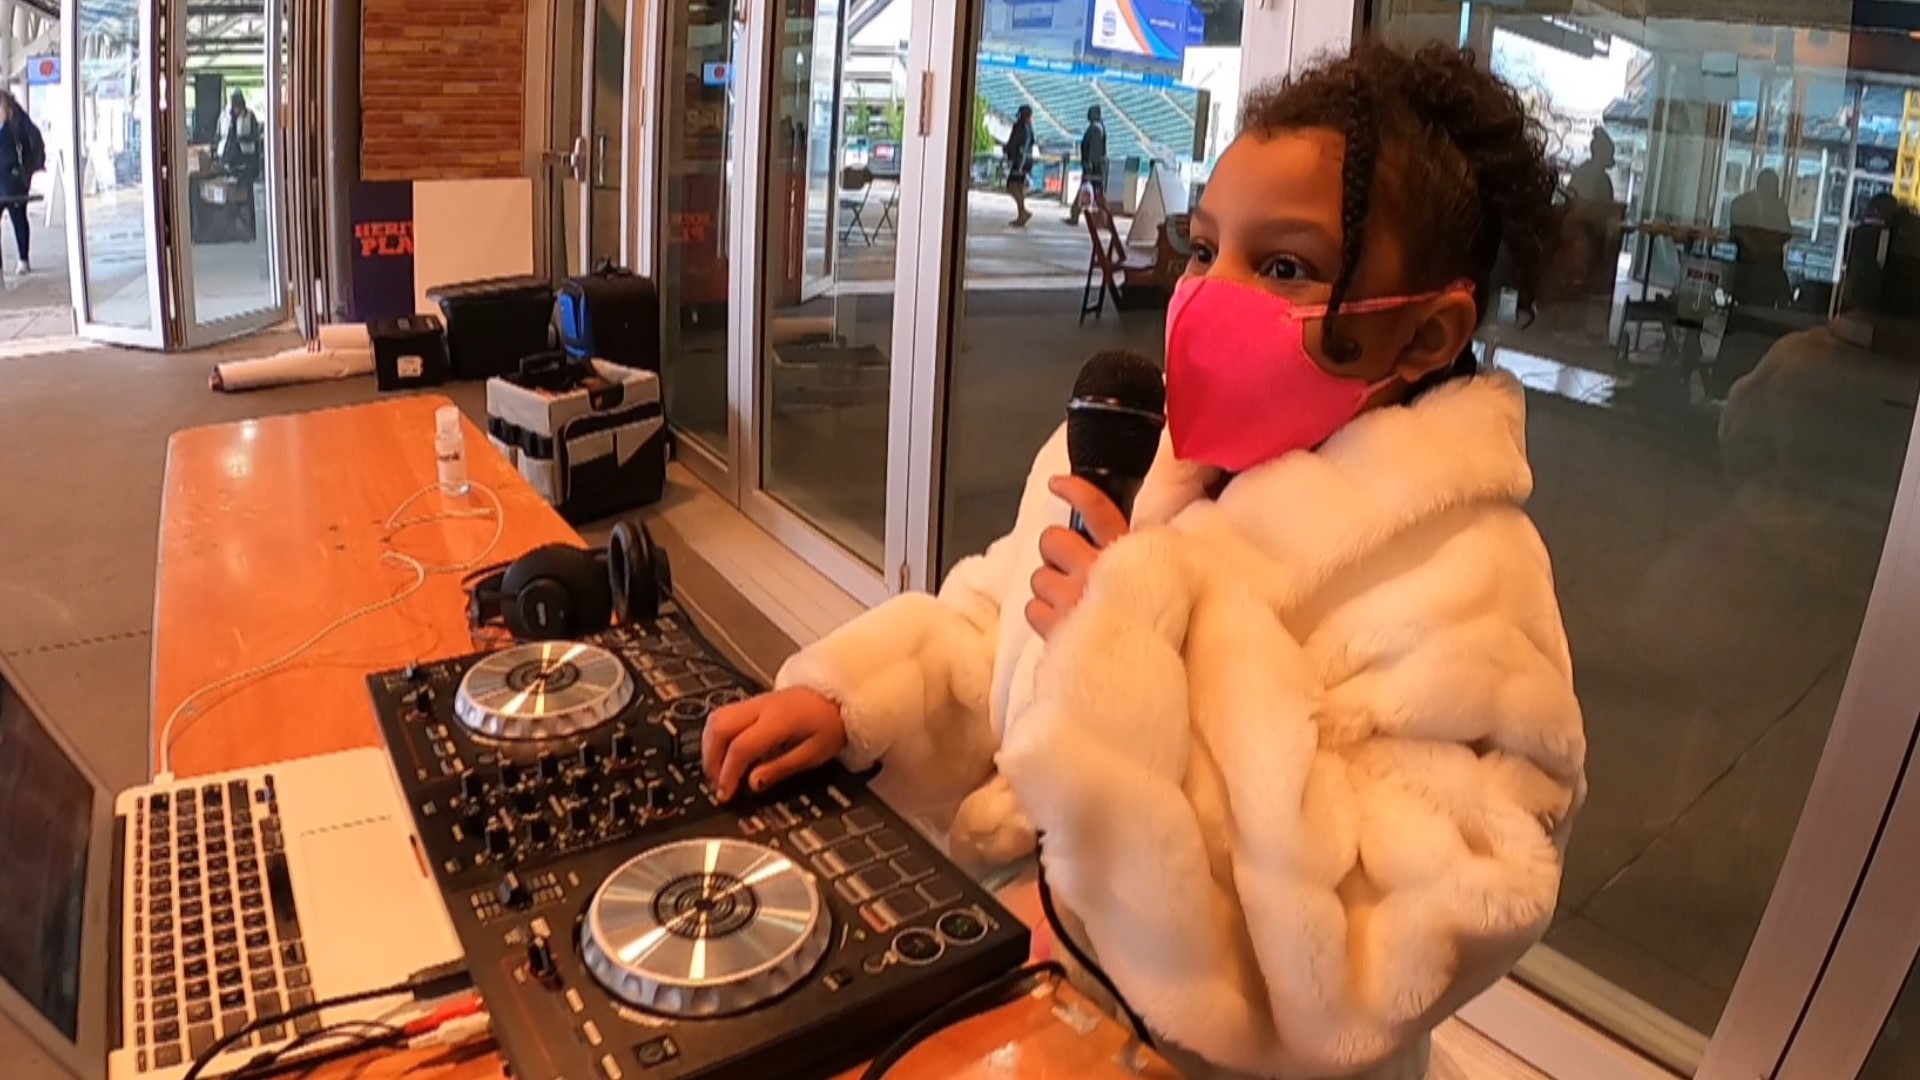 Meet 'DJ Lily Jade.' Juan and Lily Goodwin's online DJ battles started early in the coronavirus pandemic when she challenged her father's taste in music.